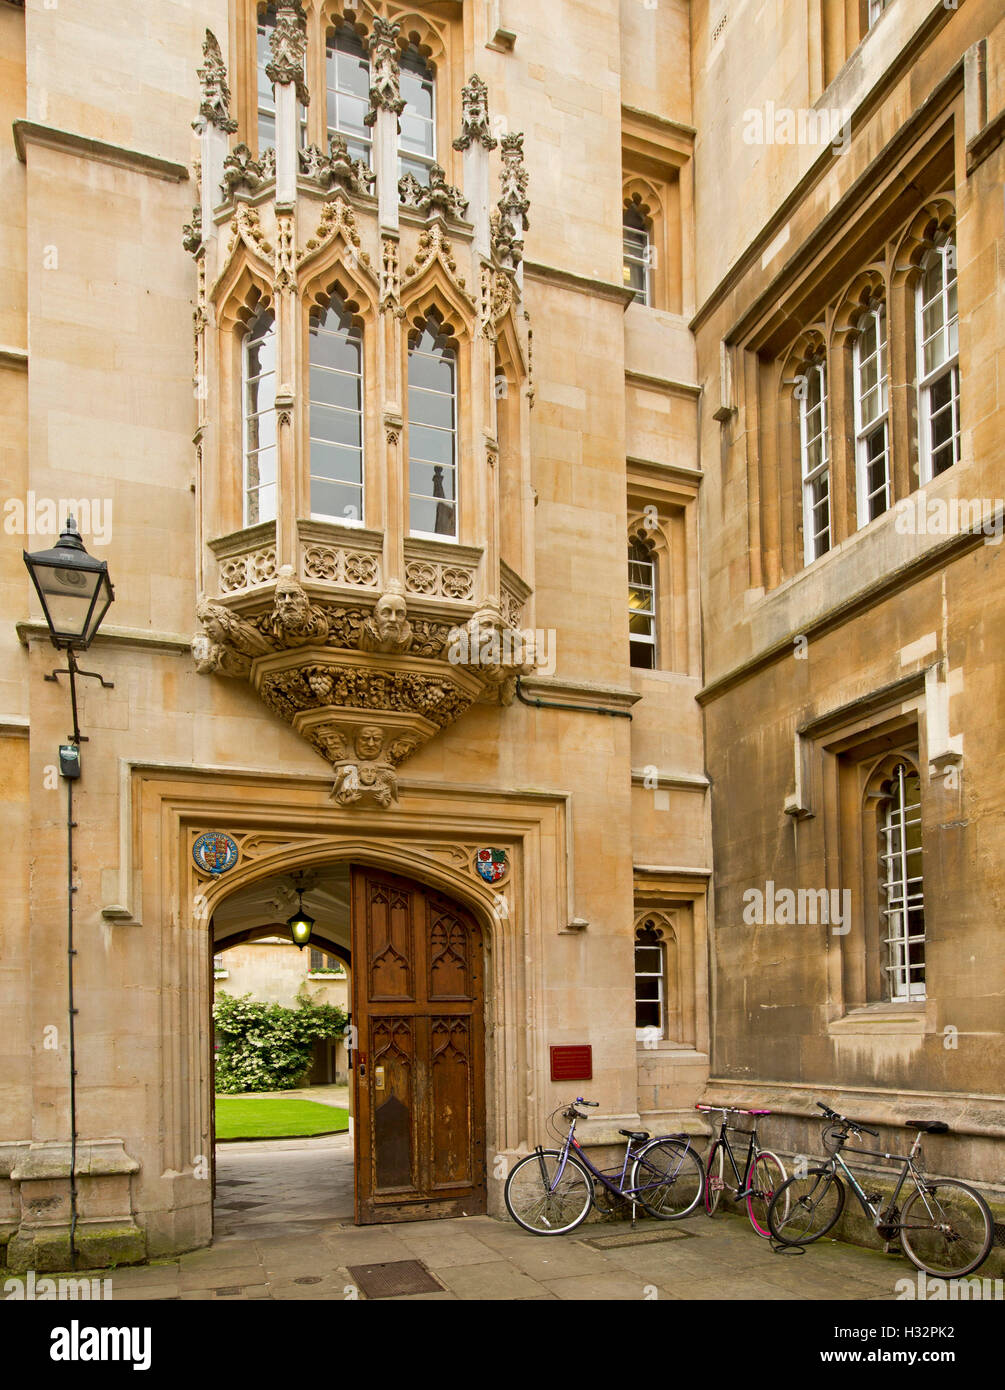 Ornate entrance to historic building with gothic style bay window, arched wooden door & bicycles leaning on wall in Oxford UK Stock Photo